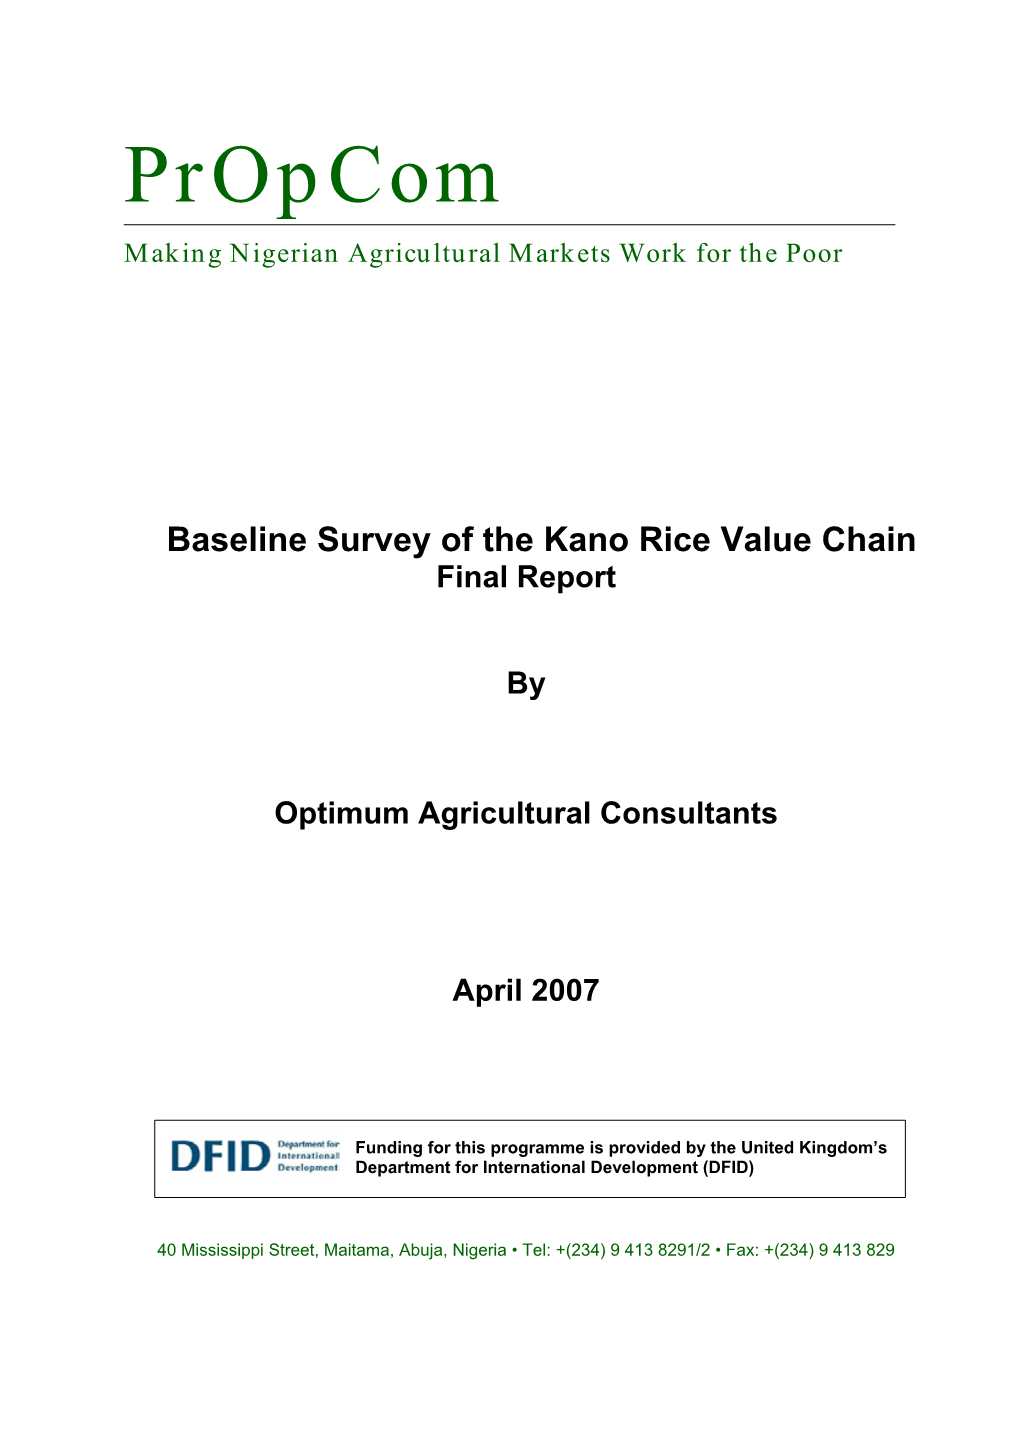 Final Report on the Baseline Survey of the Kano Rice Value Chain